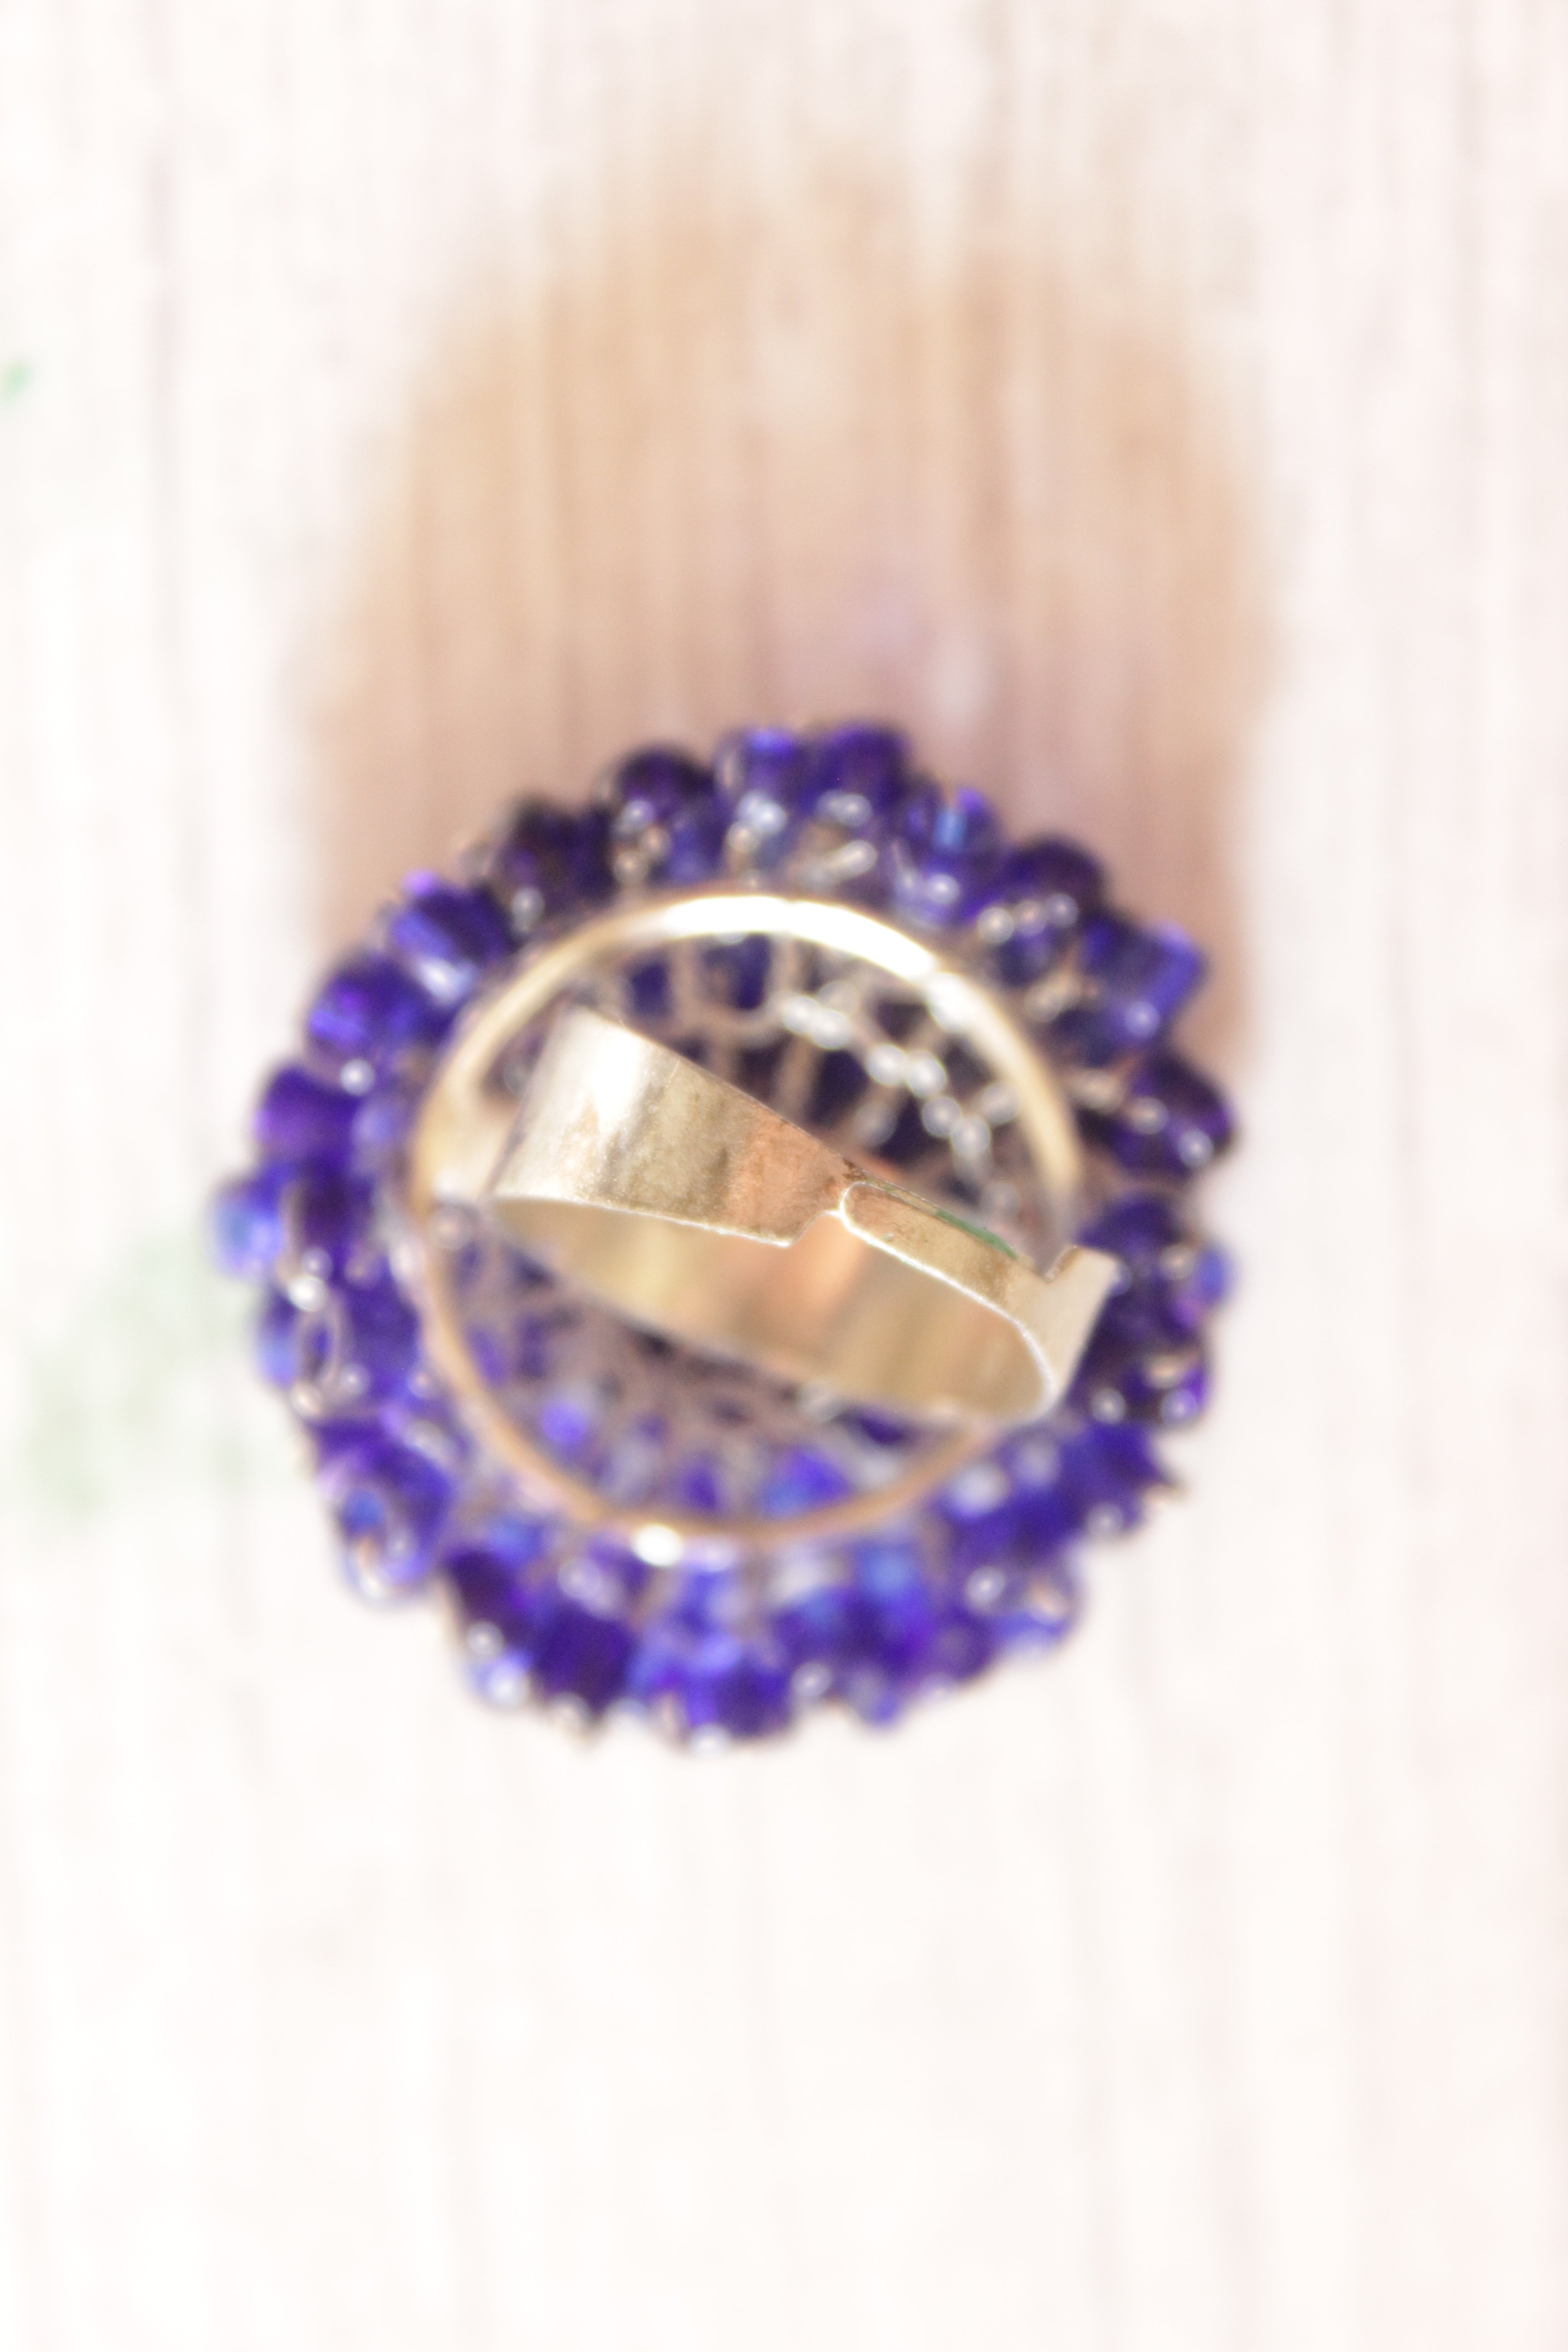 Multiple Small Purple Glass Stones Silver Finish Metal Ring